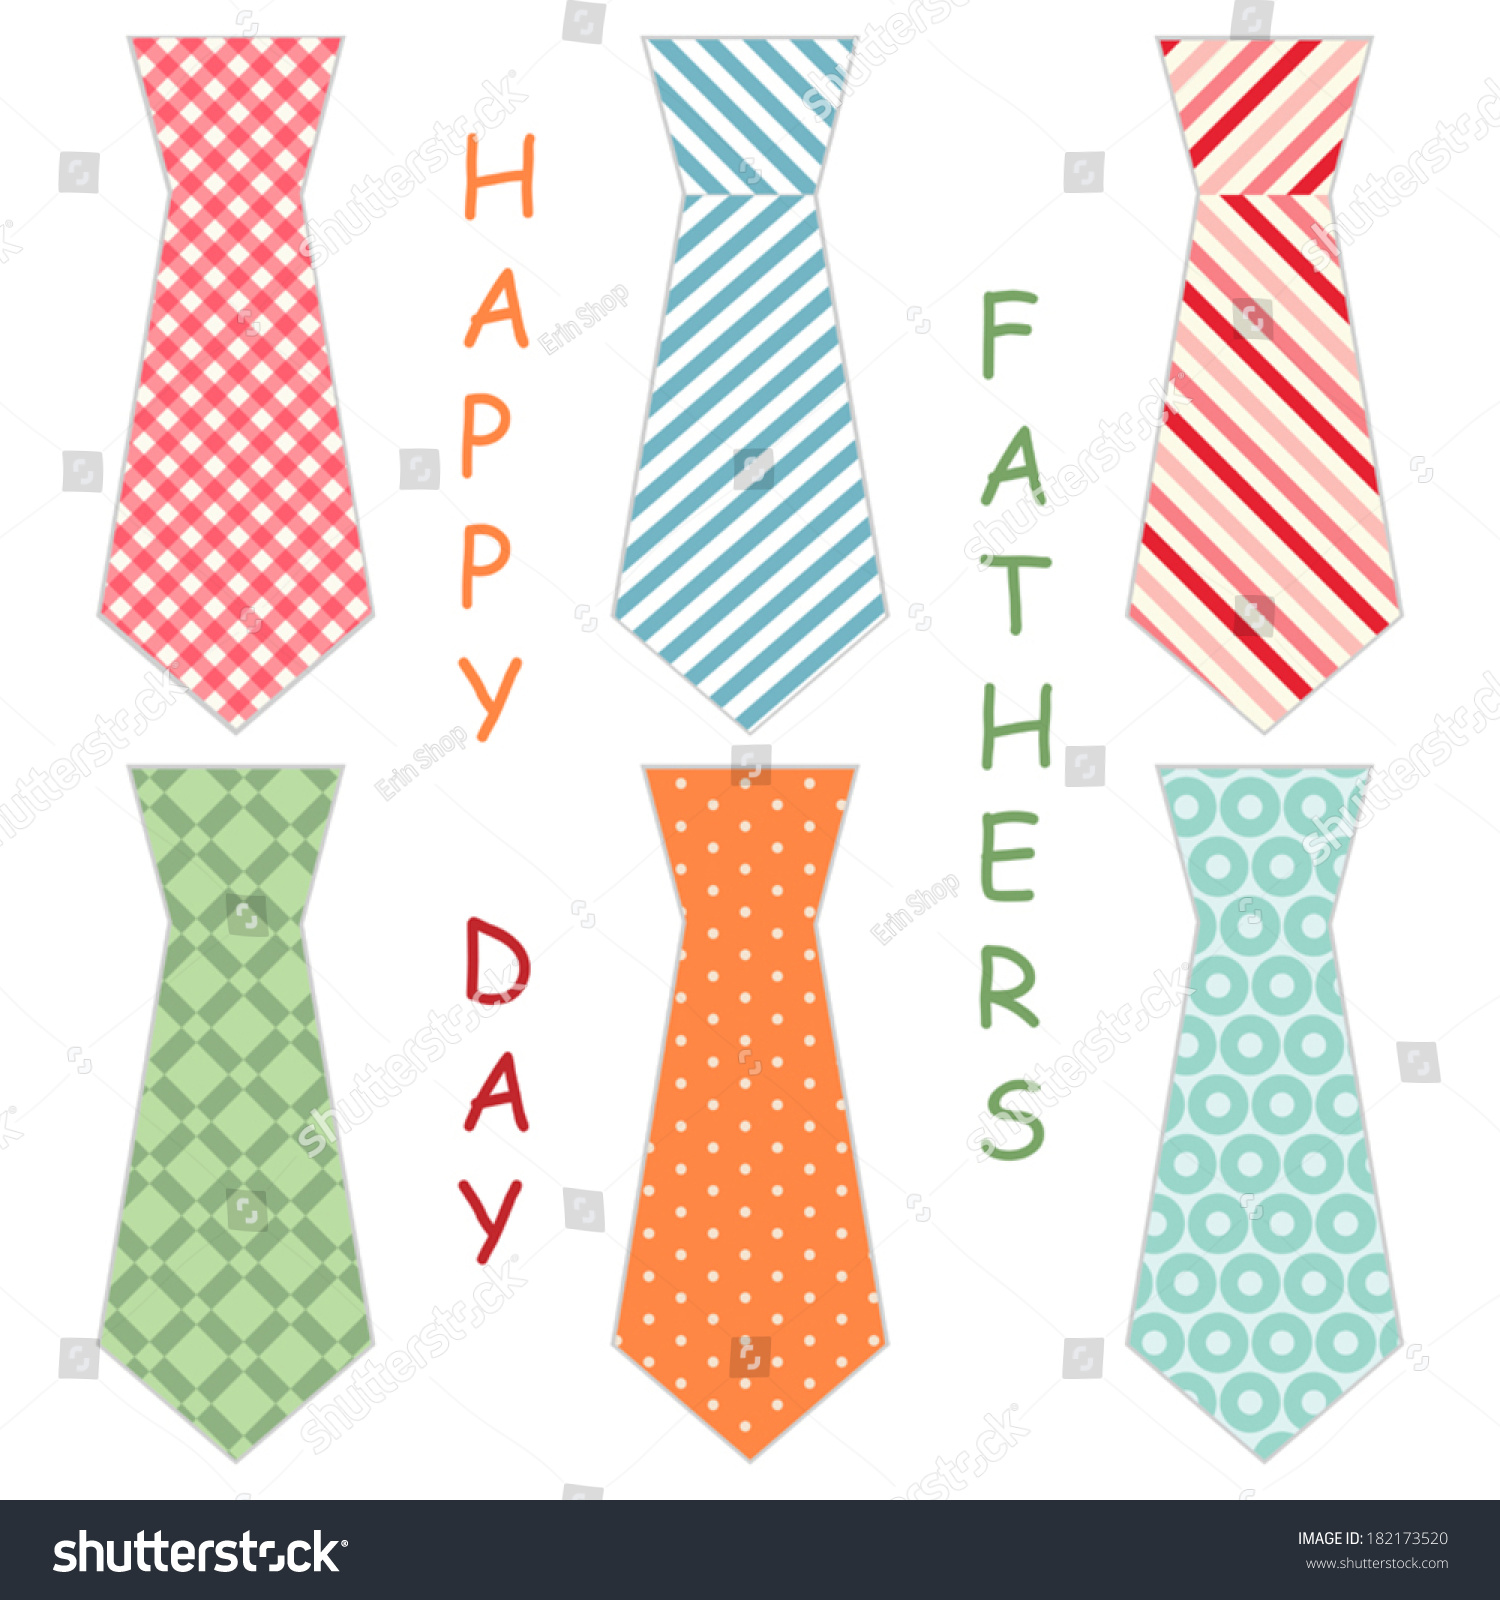 decorate a tie for father's day